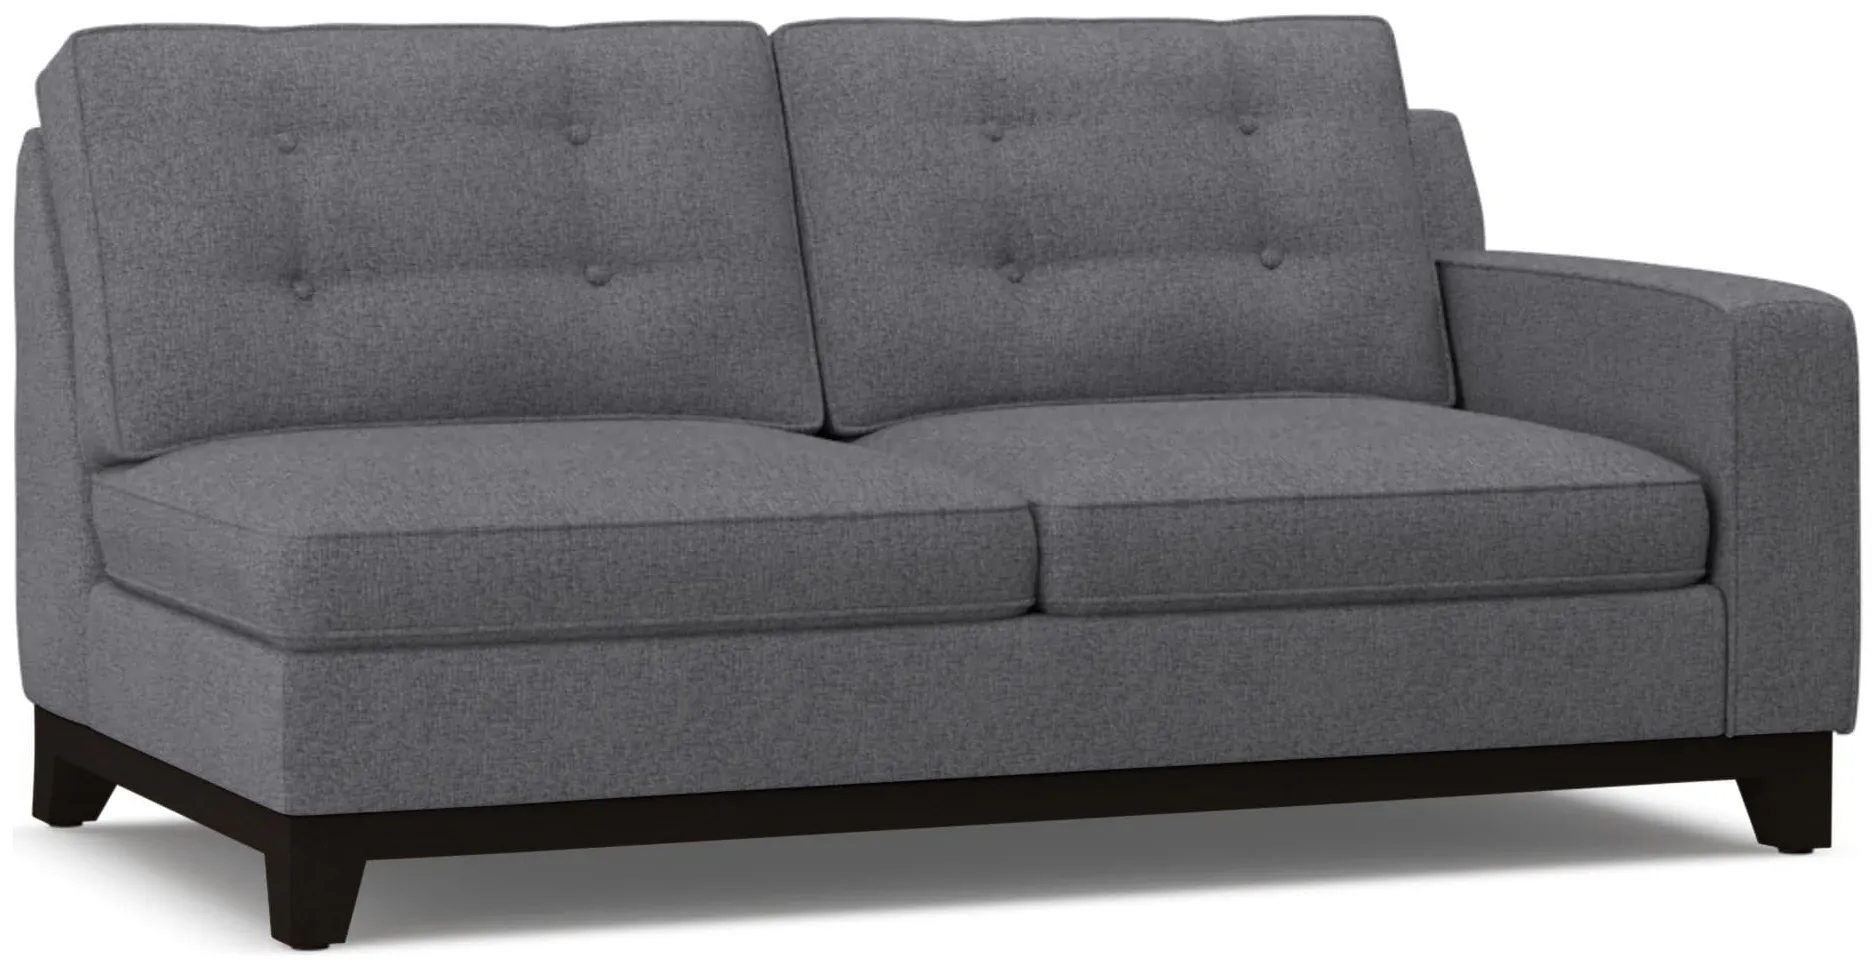 Brentwood Right Arm Apartment Size Sofa